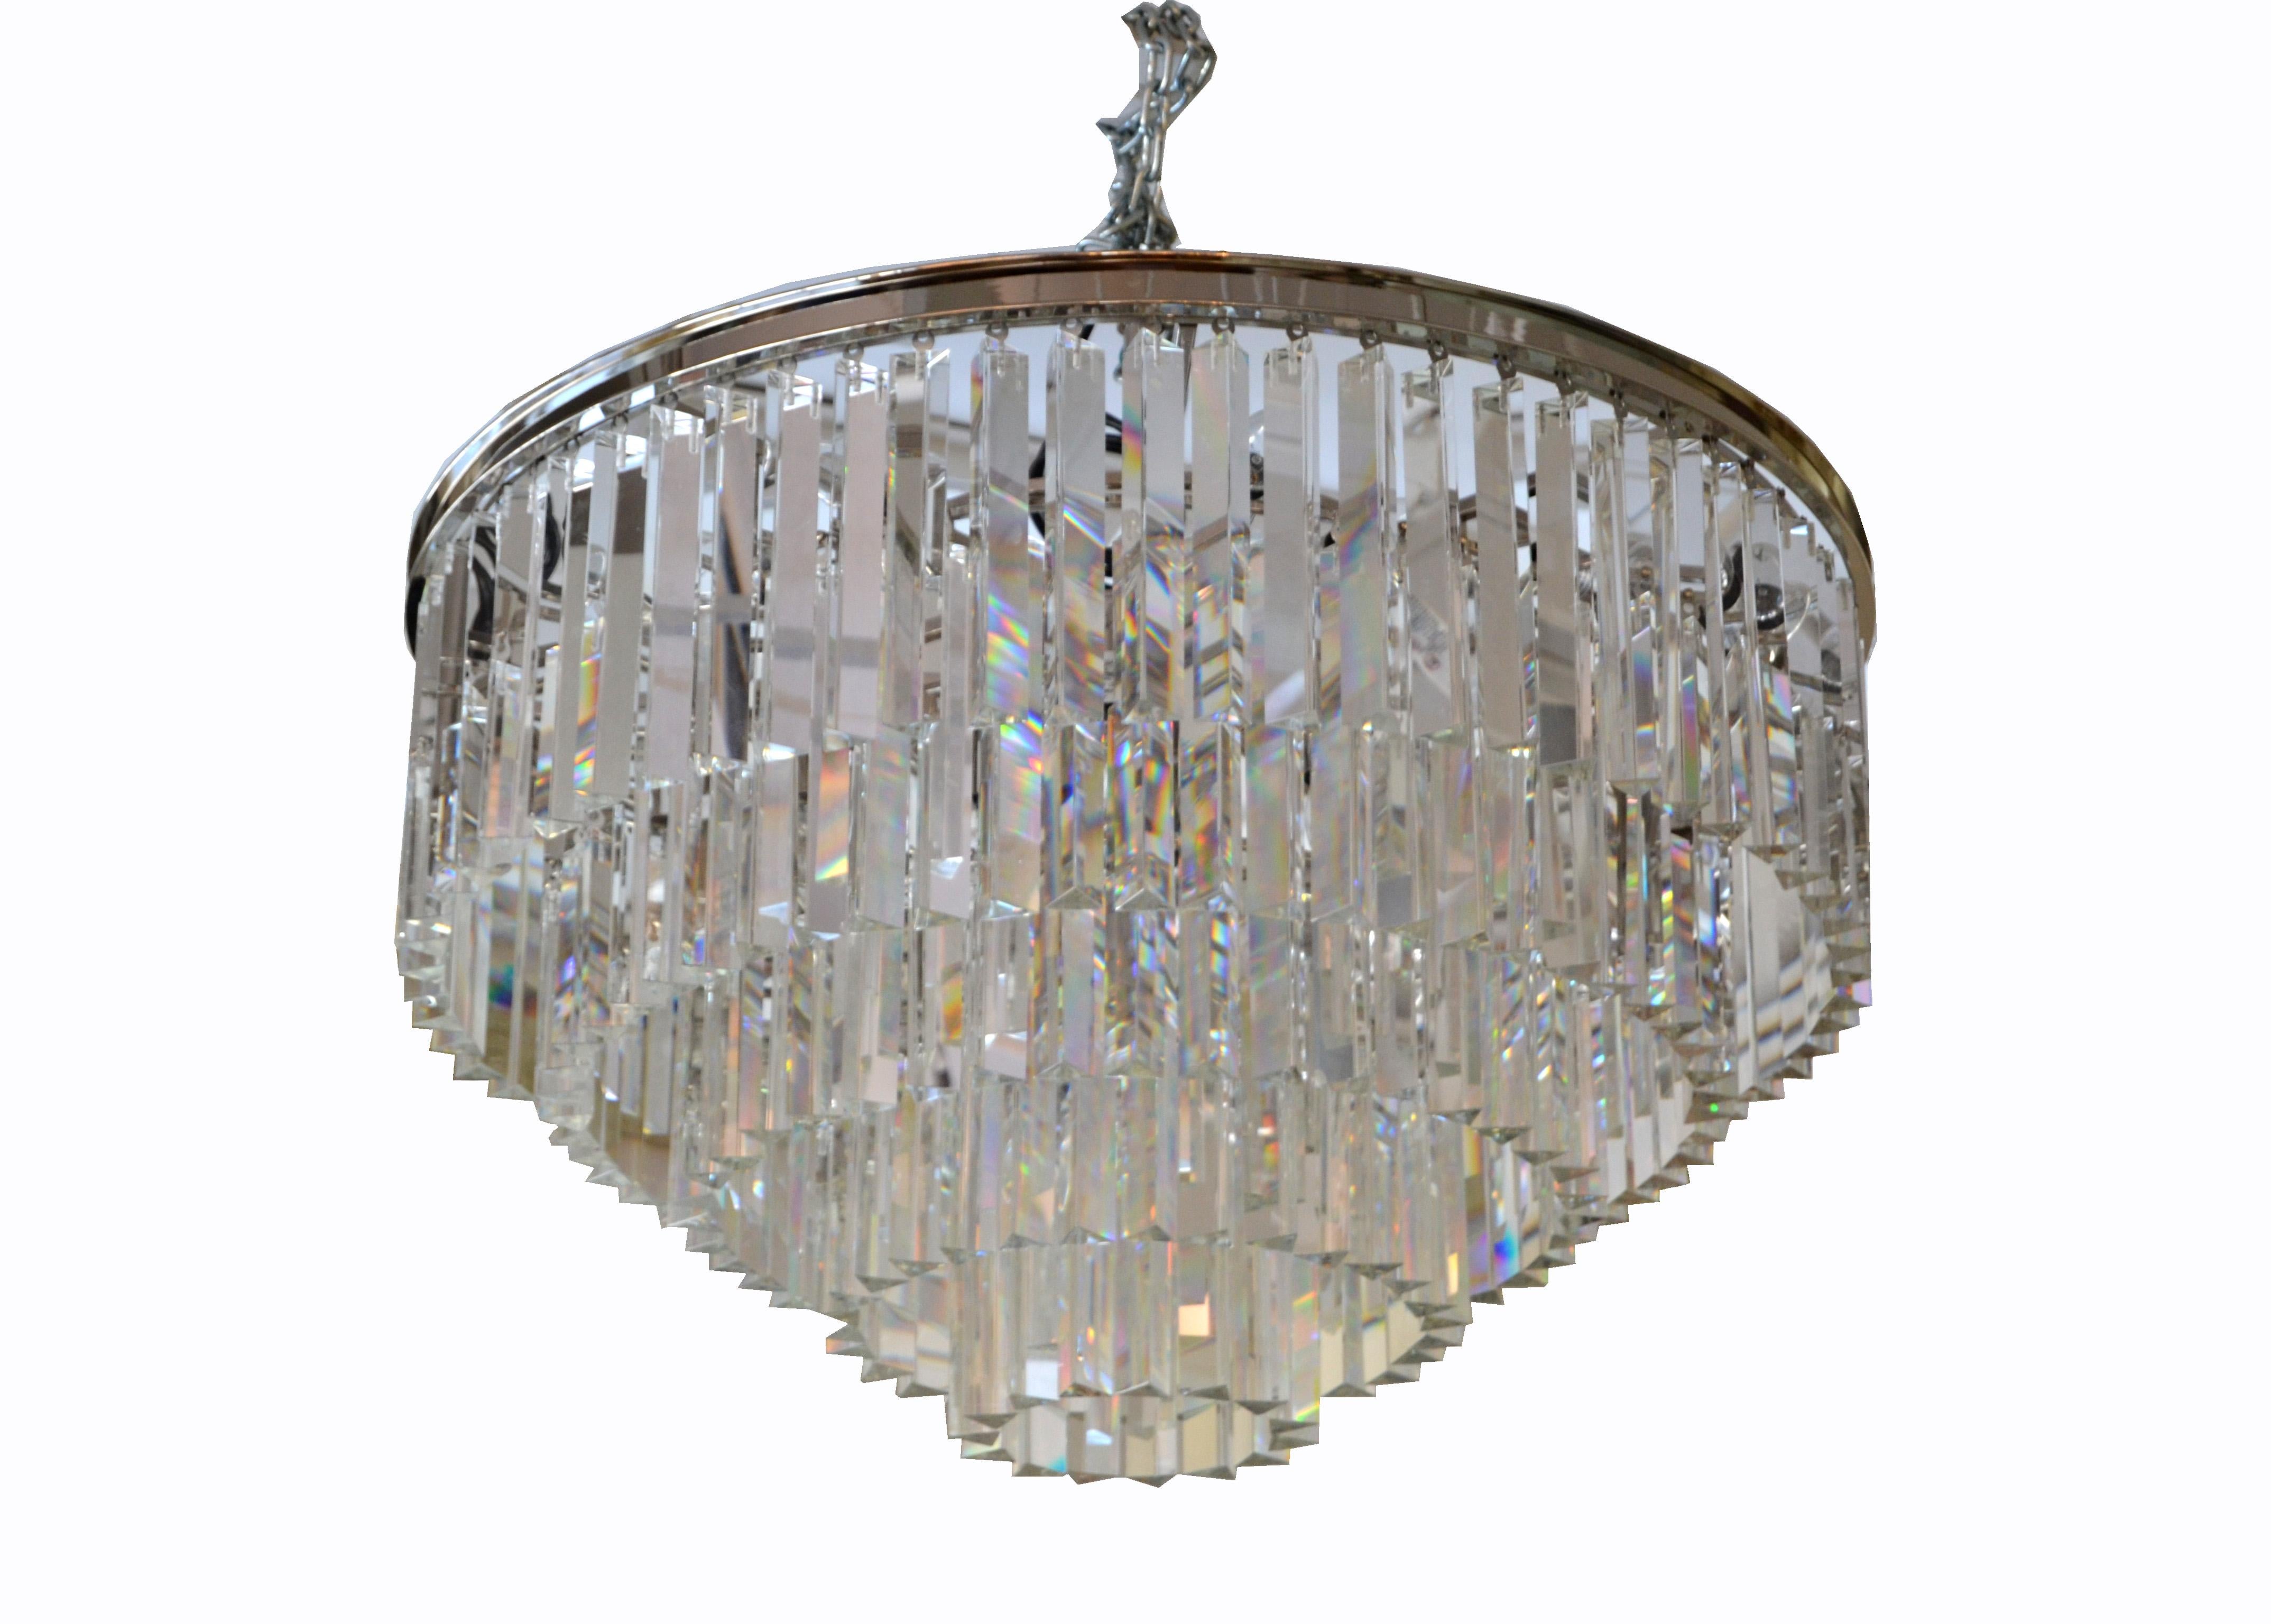 Modern spectacular five-tier chrome and mirrored crystal chandelier.
The crystals have a mirrored coating which reflects the light glamorous.
It is wired for the U.S. and uses 17 light bulbs with max. 40 watts or LED lights.
Comes with chain,